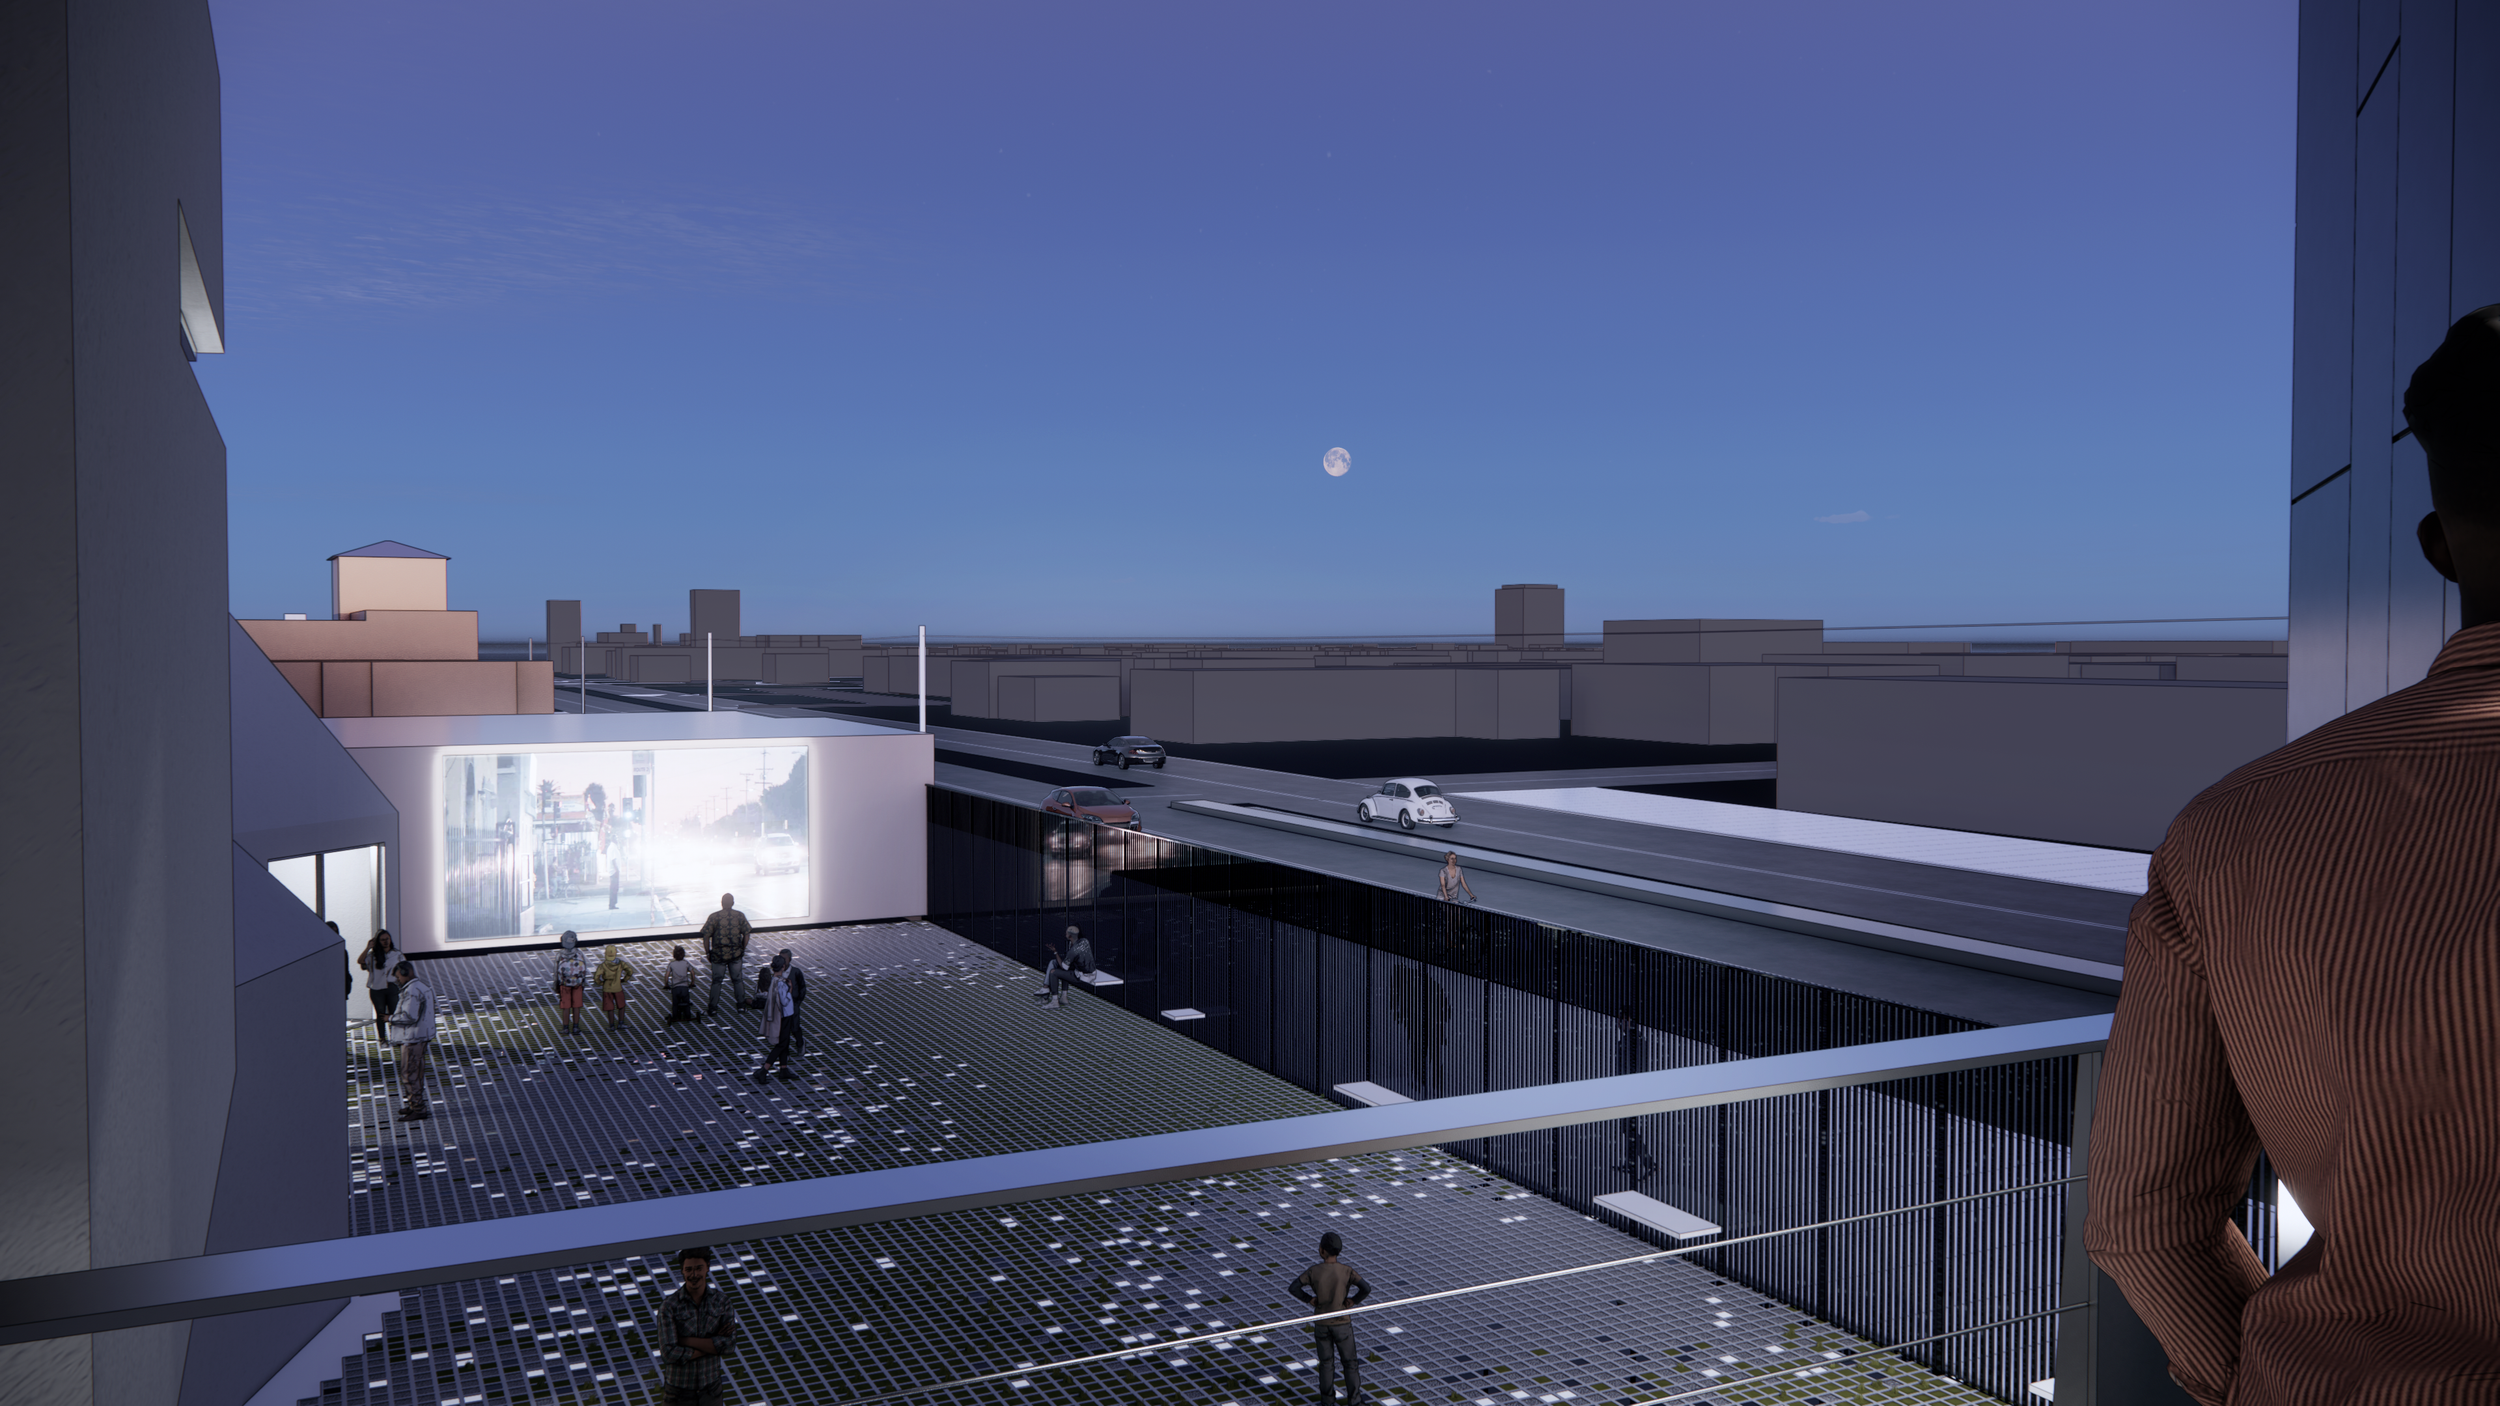 CAH-Second Floor_view to courtyard-Evening_FINAL.png